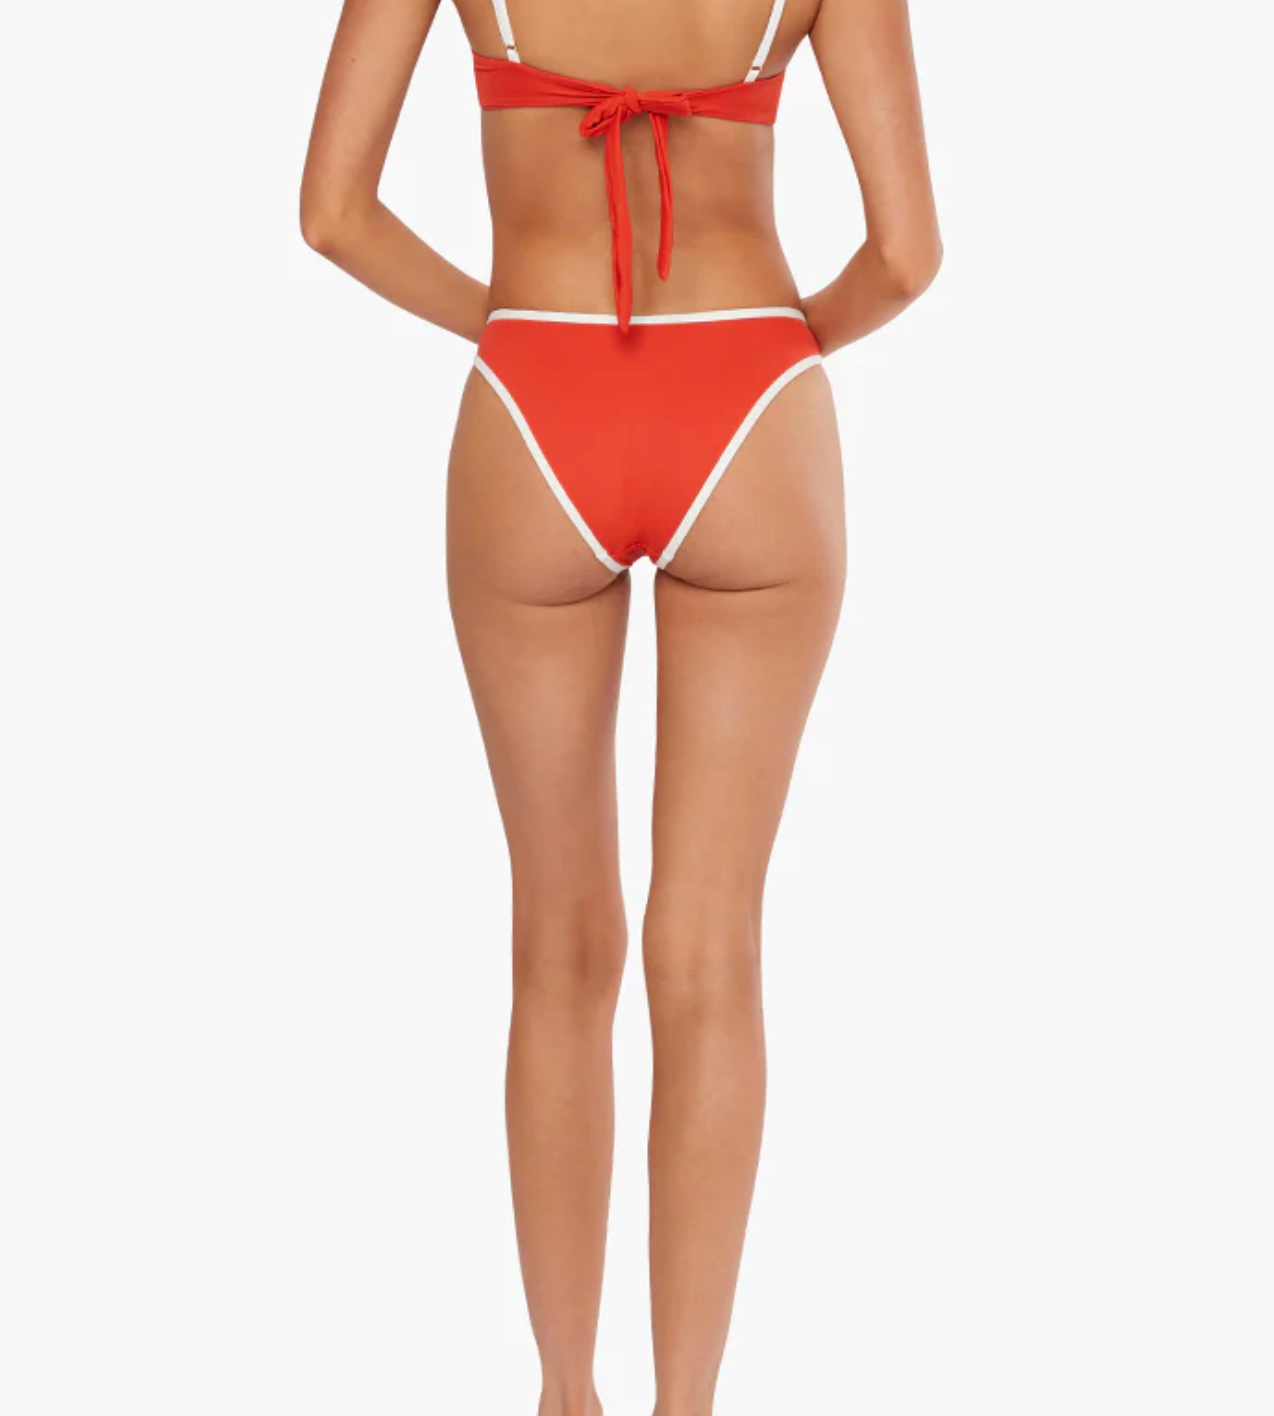 Classic Scoop Bottom - Fiery Red/Off White - We Wore What